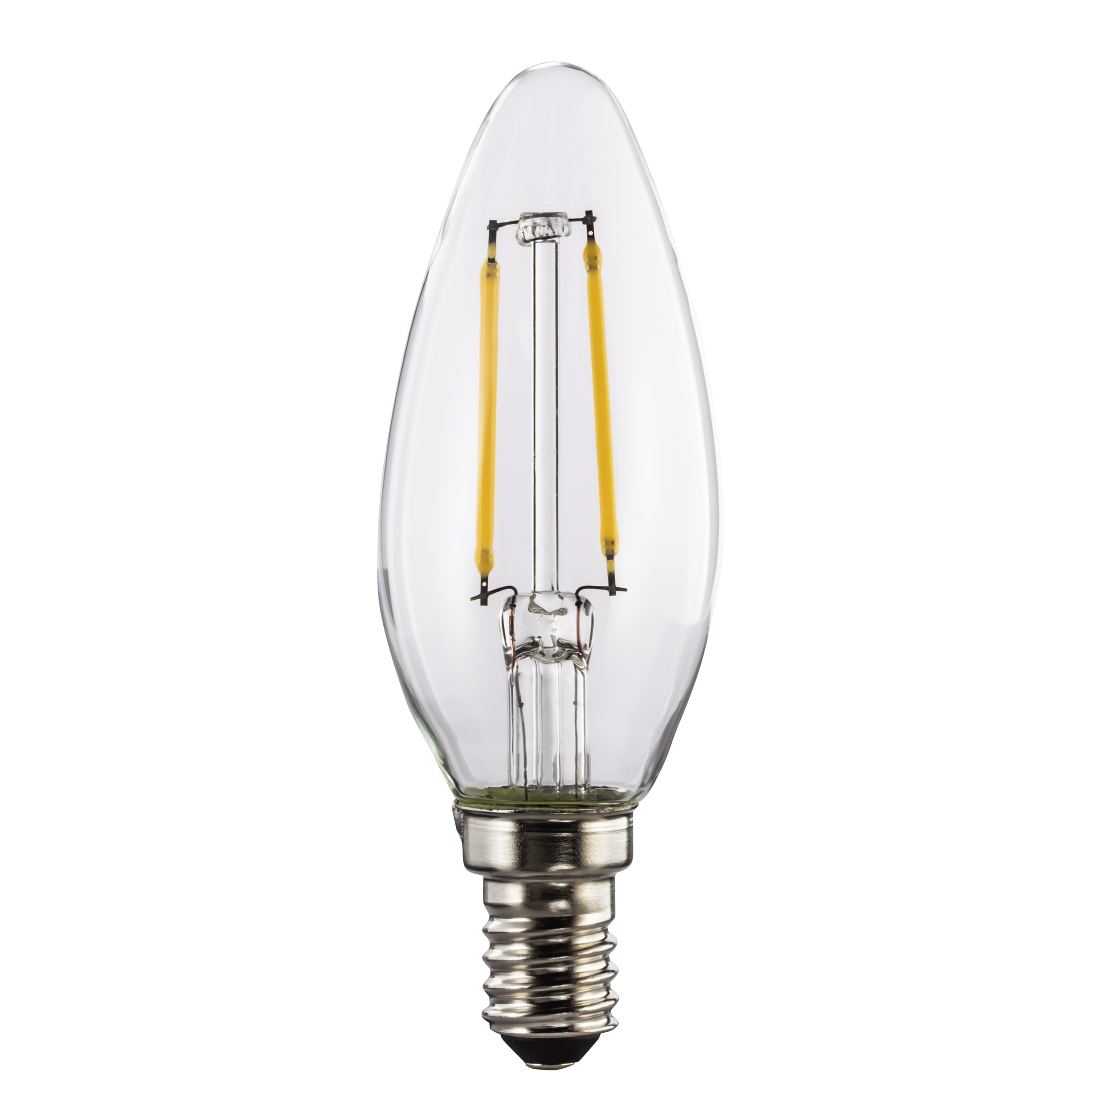 abx High-Res Image - Xavax, LED Filament, E14, 250lm replaces 25W, candle bulb, warm white